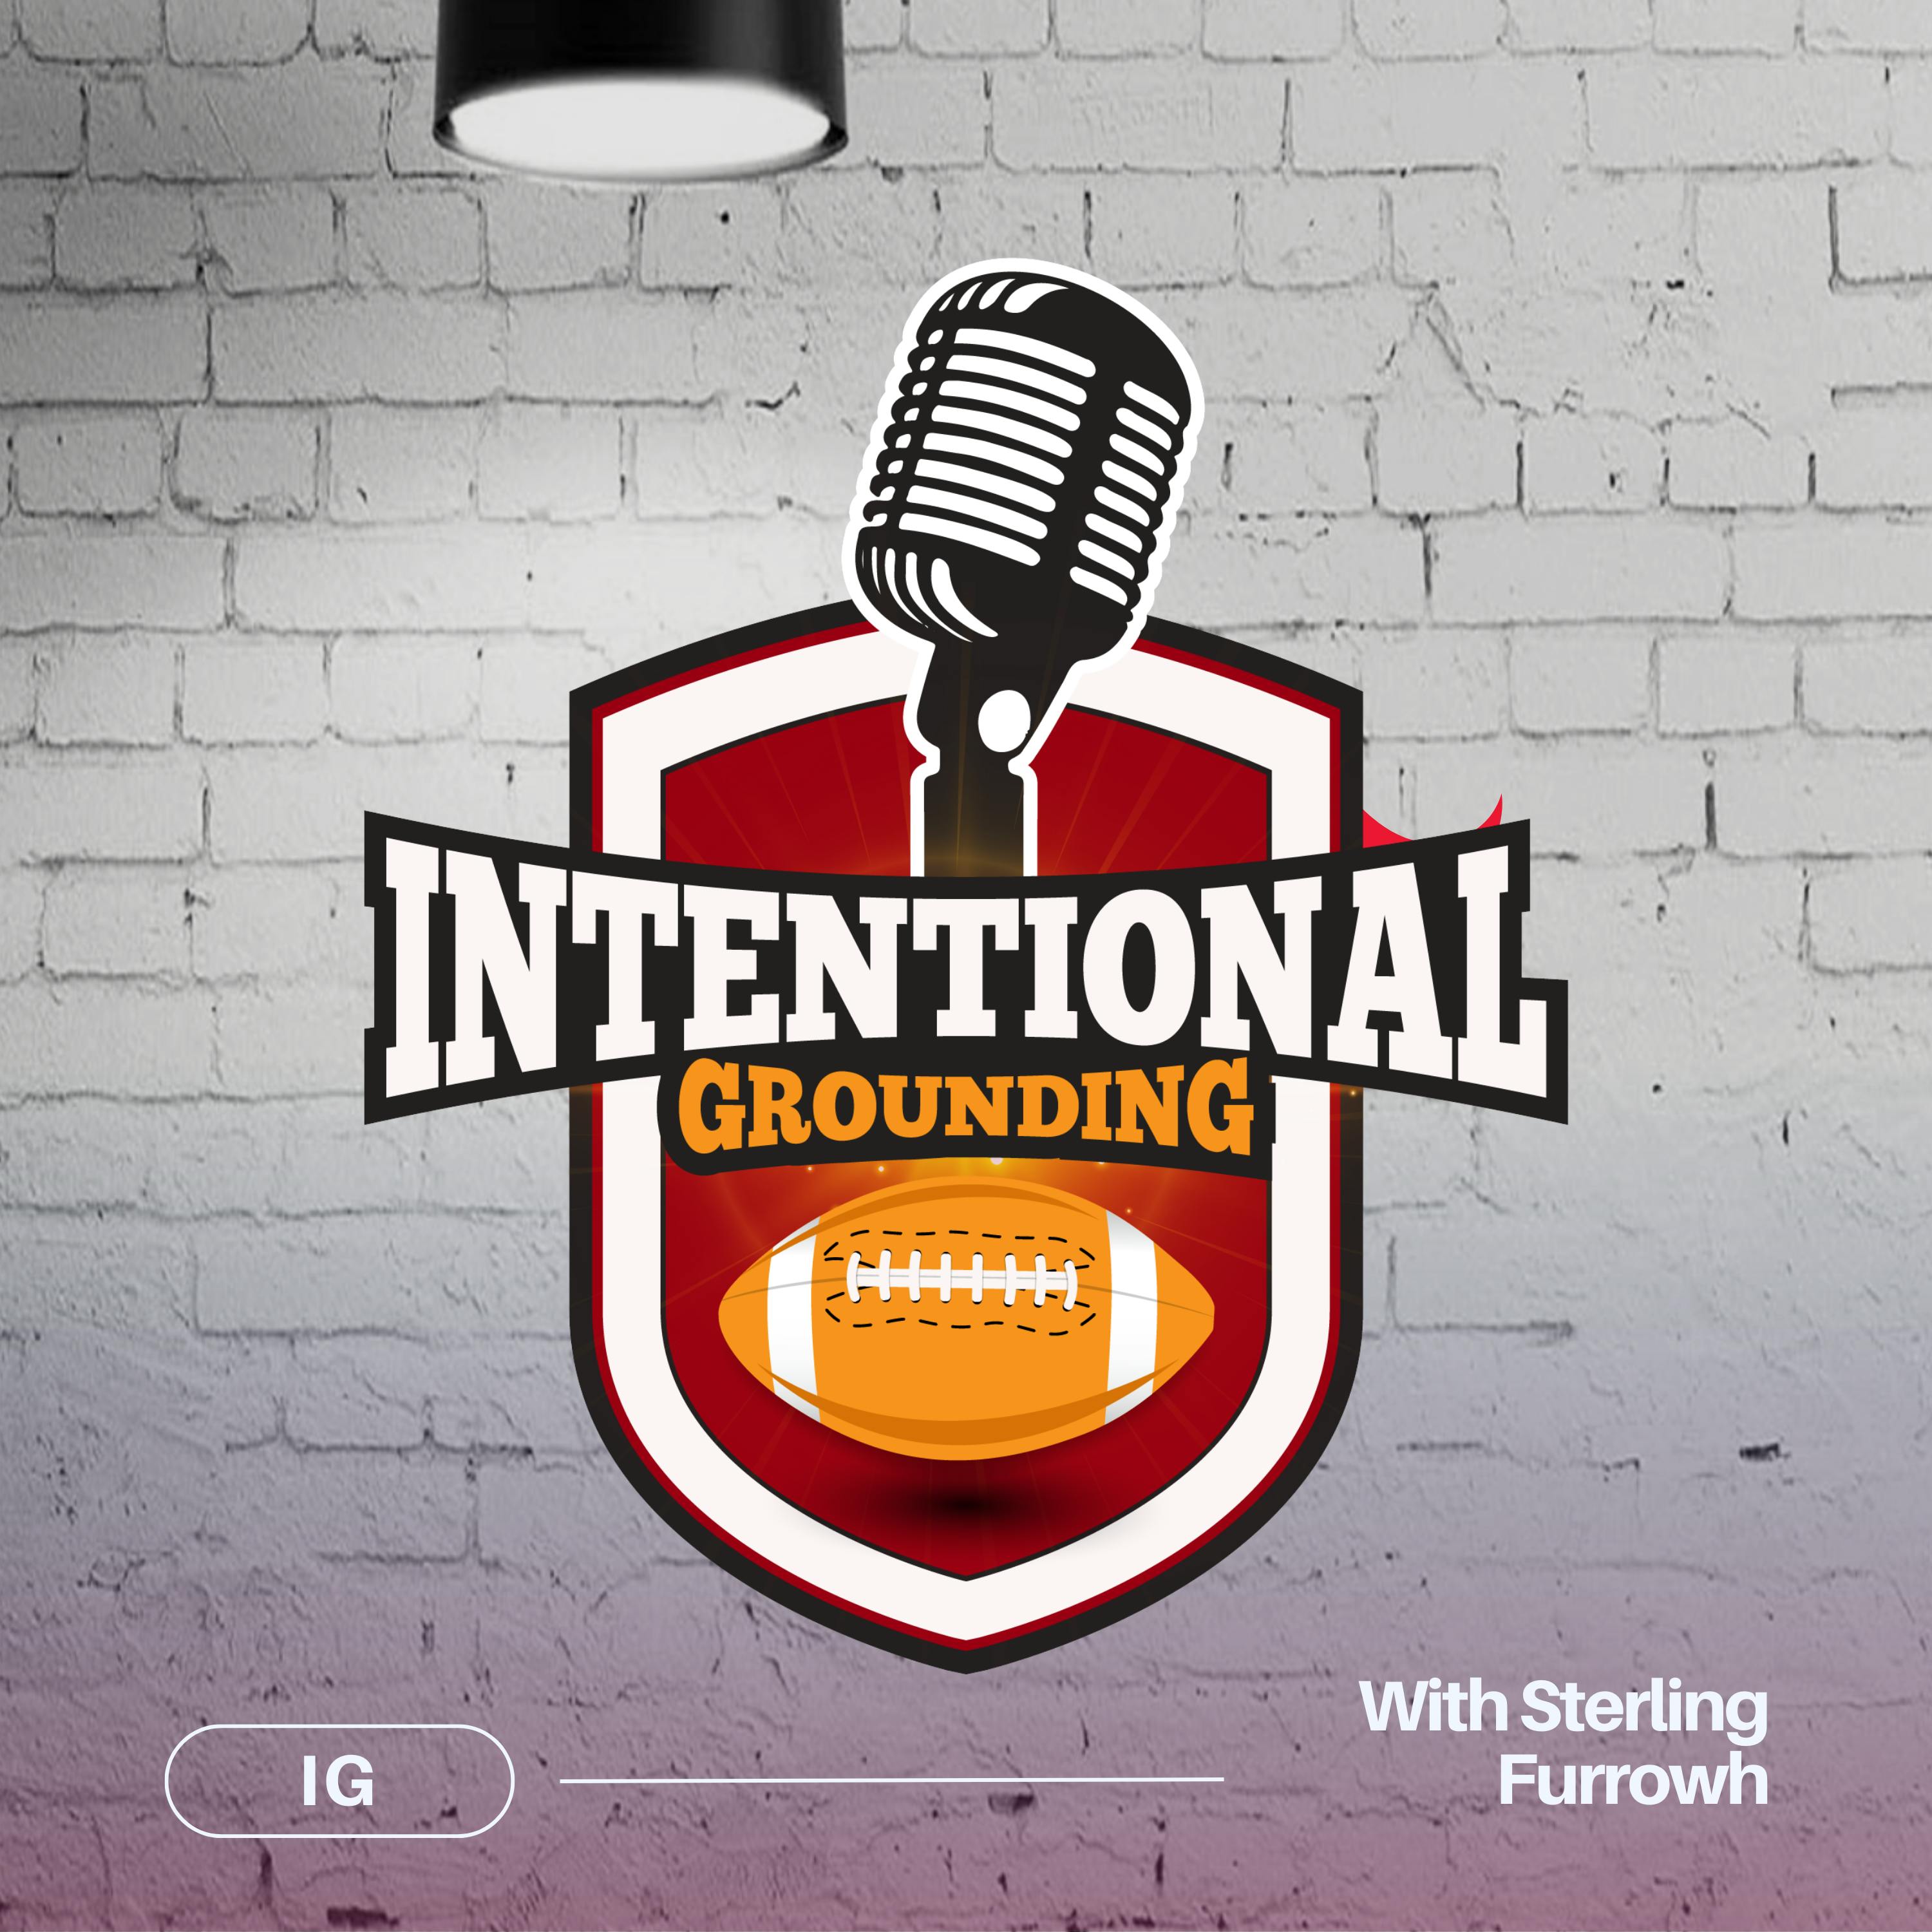 Intentional Grounding: Bills Lose In The Jungle 24-18 Post Game Reaction